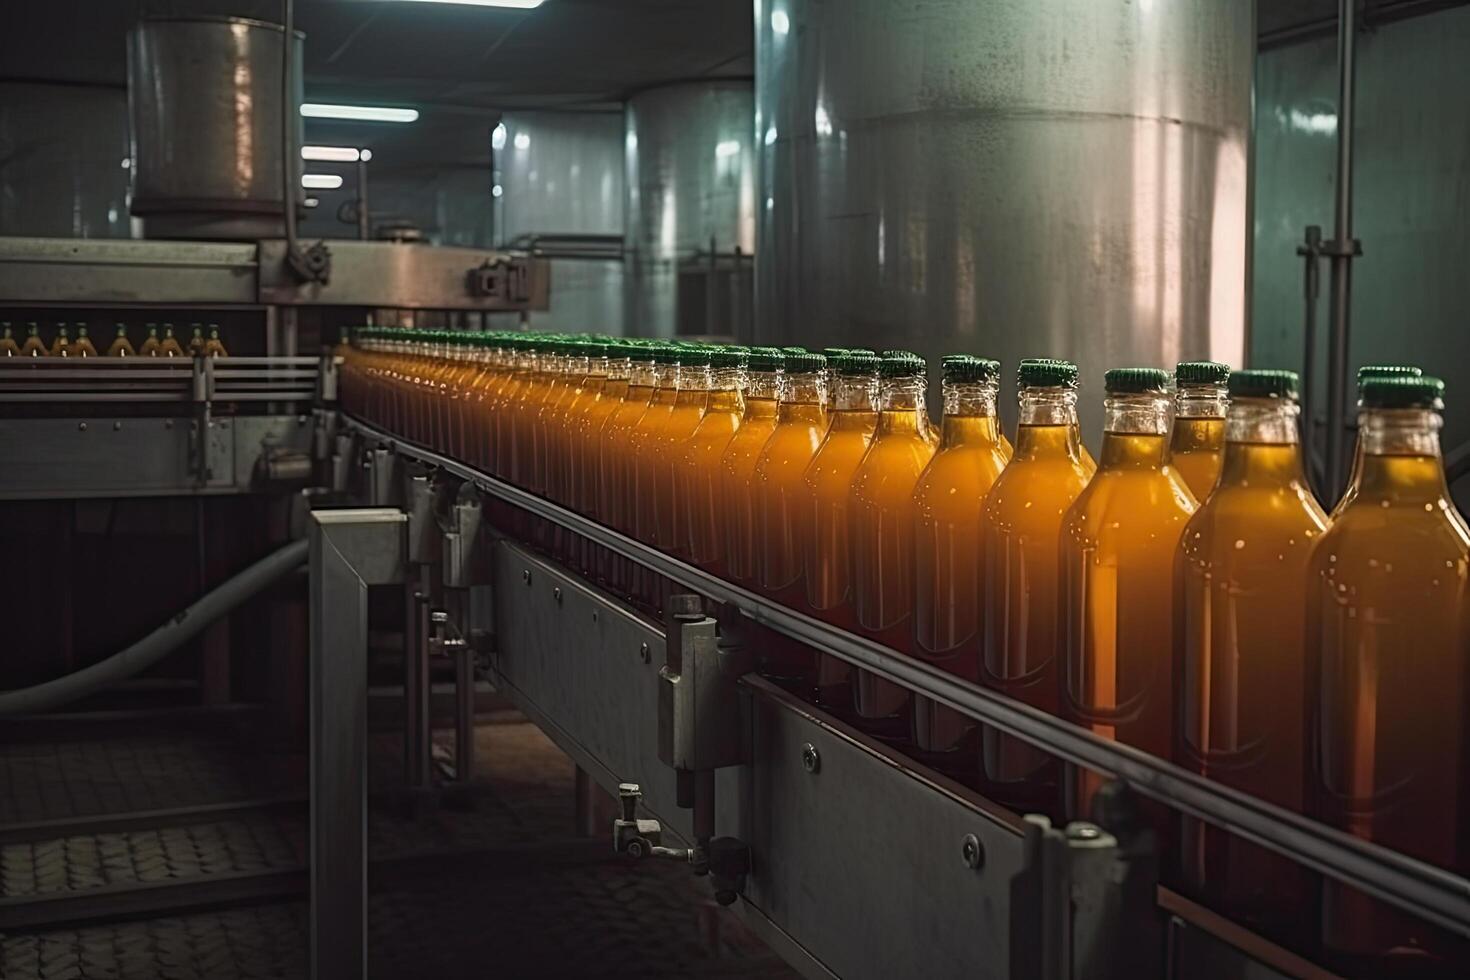 Bottling line of orange juice in bottles at a modern beverage plant. A beverage plant factory interior view with a conveyor system, photo